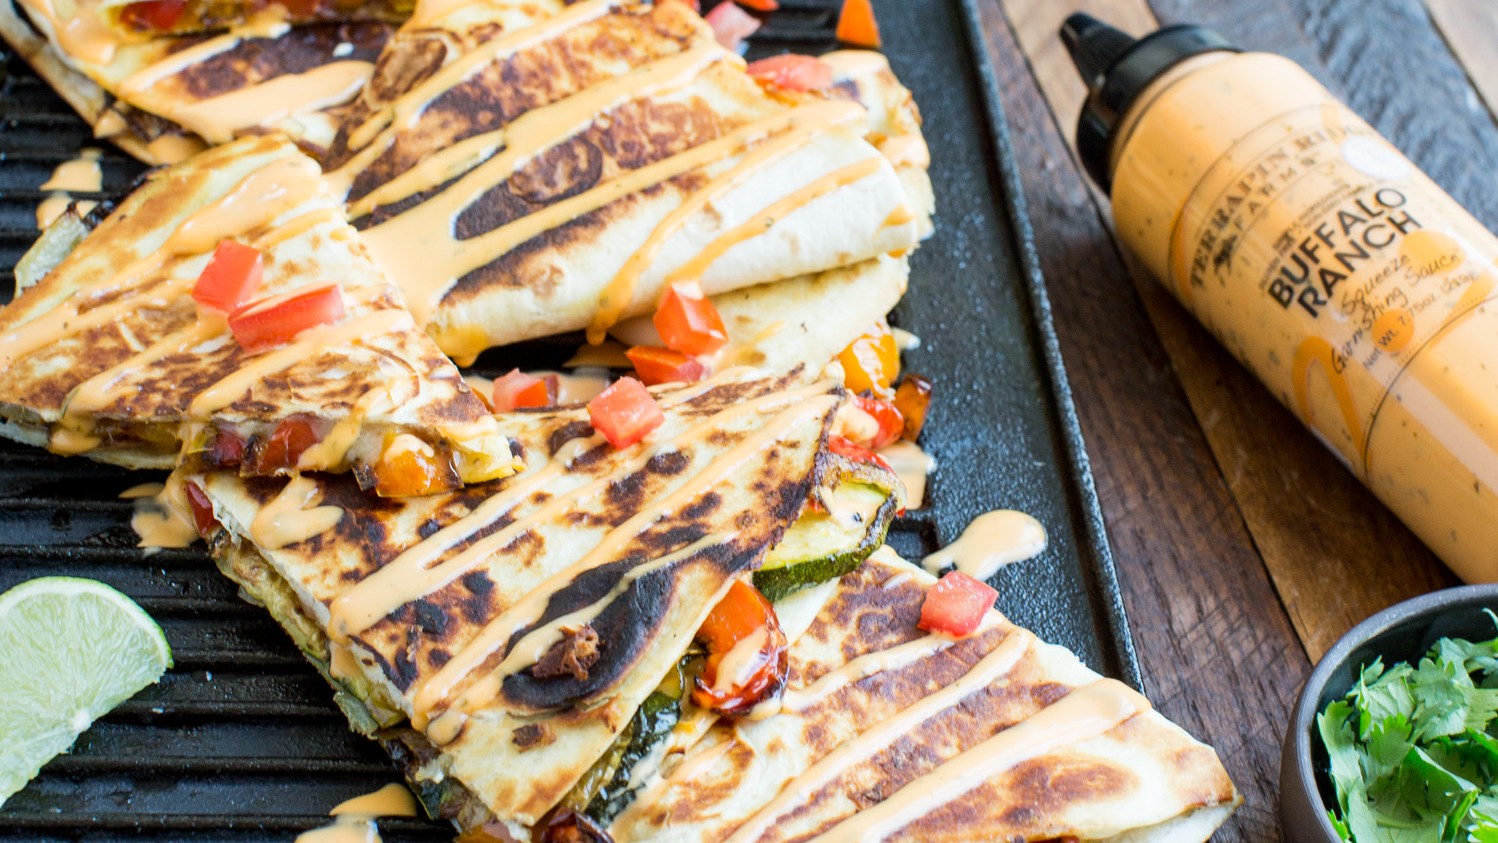 Image of Buffalo Ranch Chicken and Vegetable Quesadilla